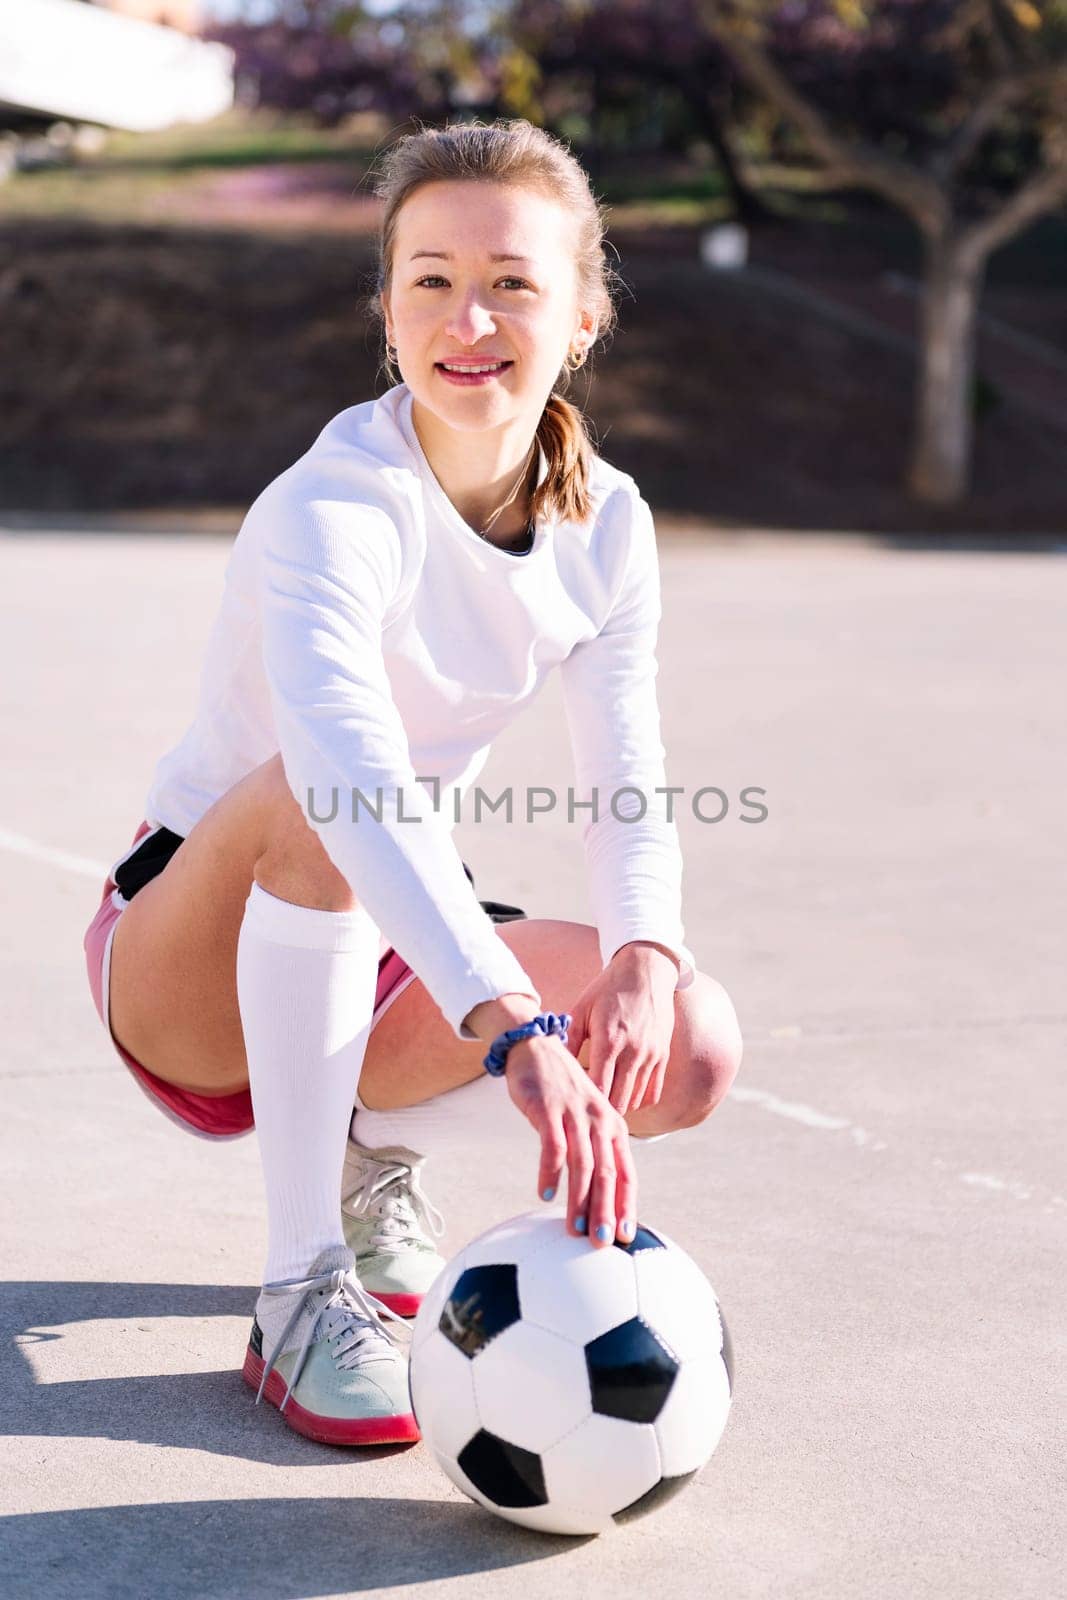 young caucasian woman squatting next to a soccer ball ready to play in a urban football court, concept of sport and active lifestyle